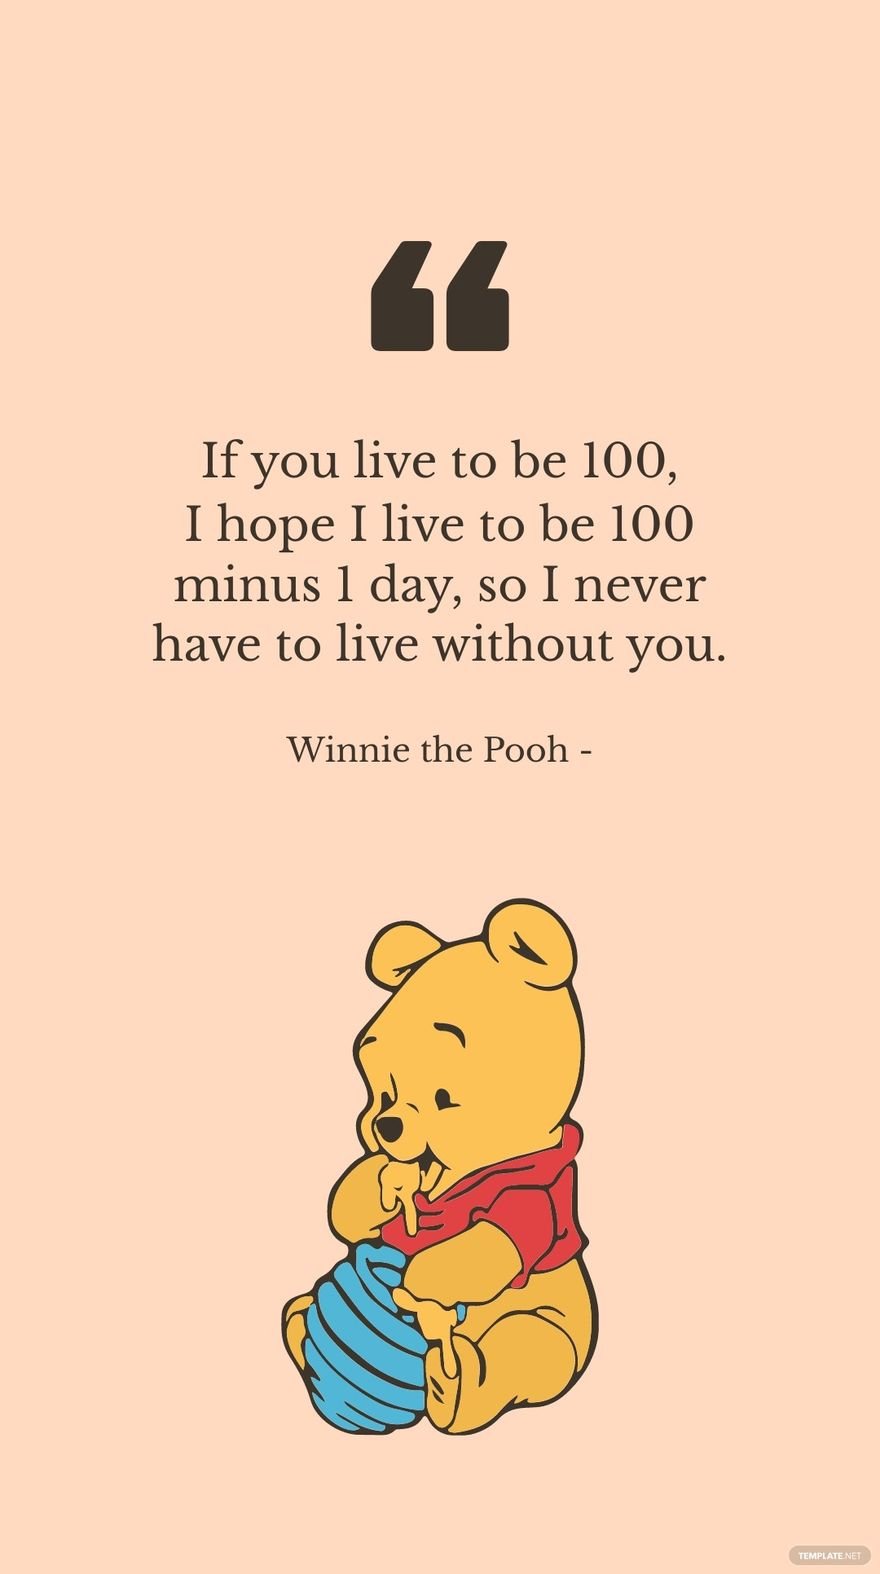 Winnie the Pooh - If you live to be 100, I hope I live to be 100 minus 1 day, so I never have to live without you. in JPG